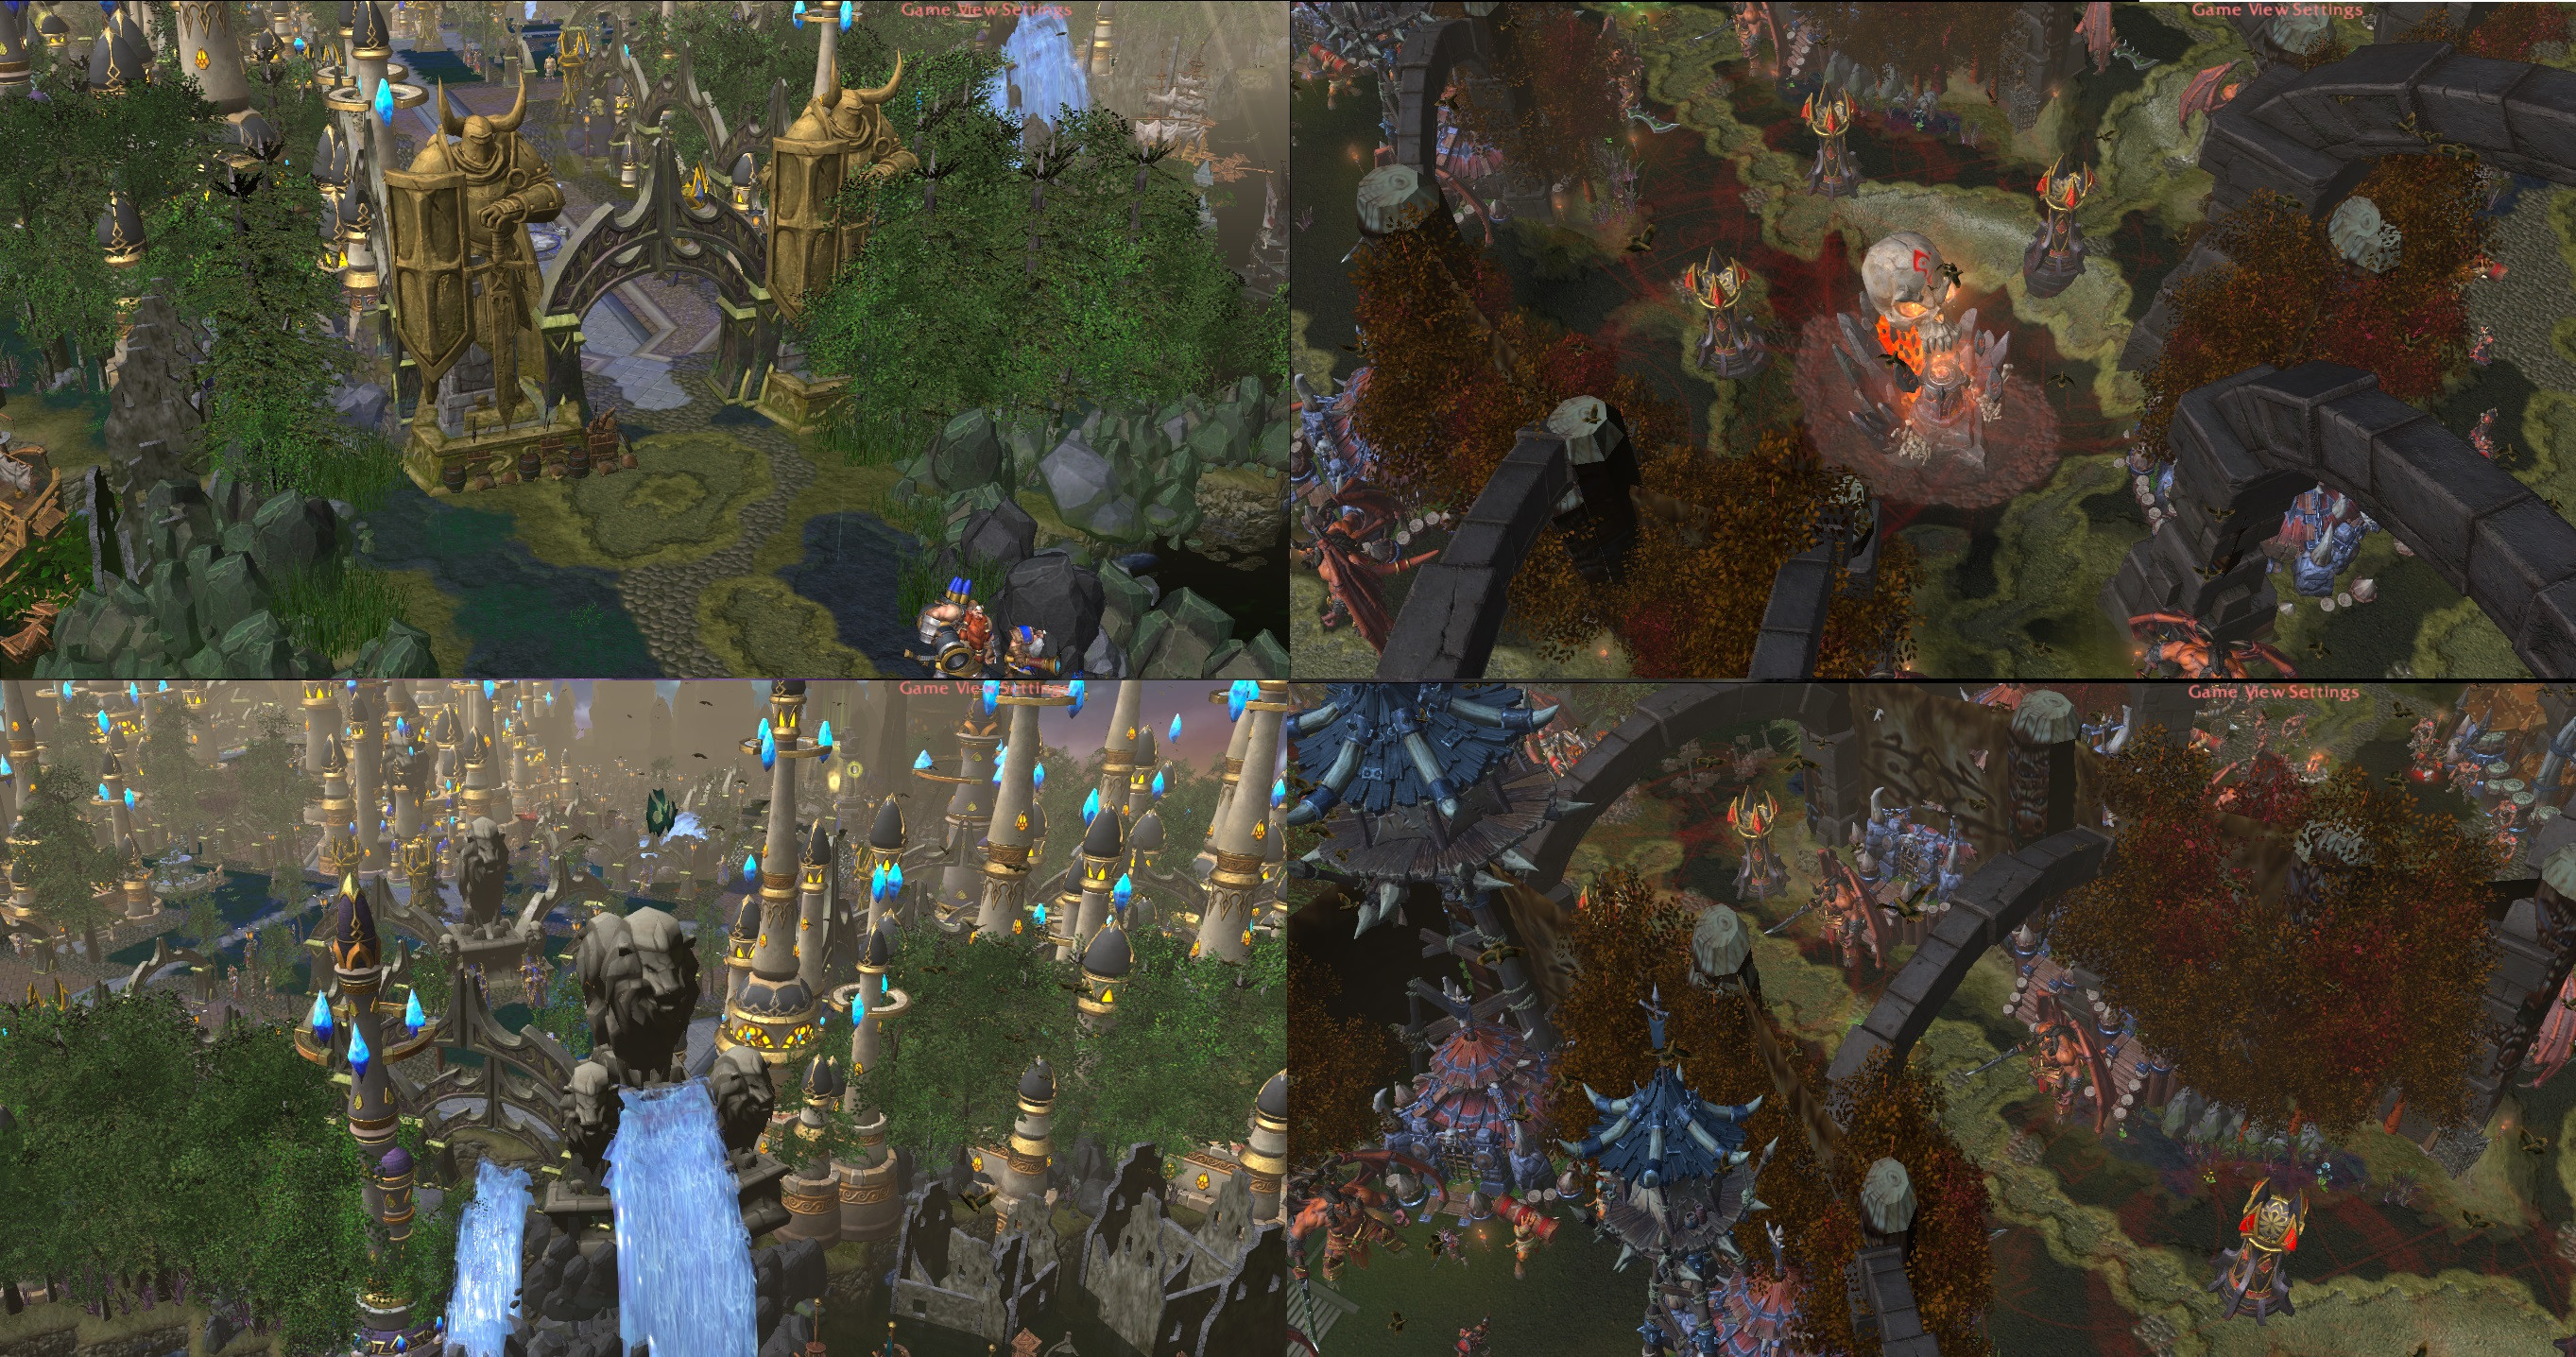 Warcraft III - Custom Moba Template. Enhanced with reforged assets.